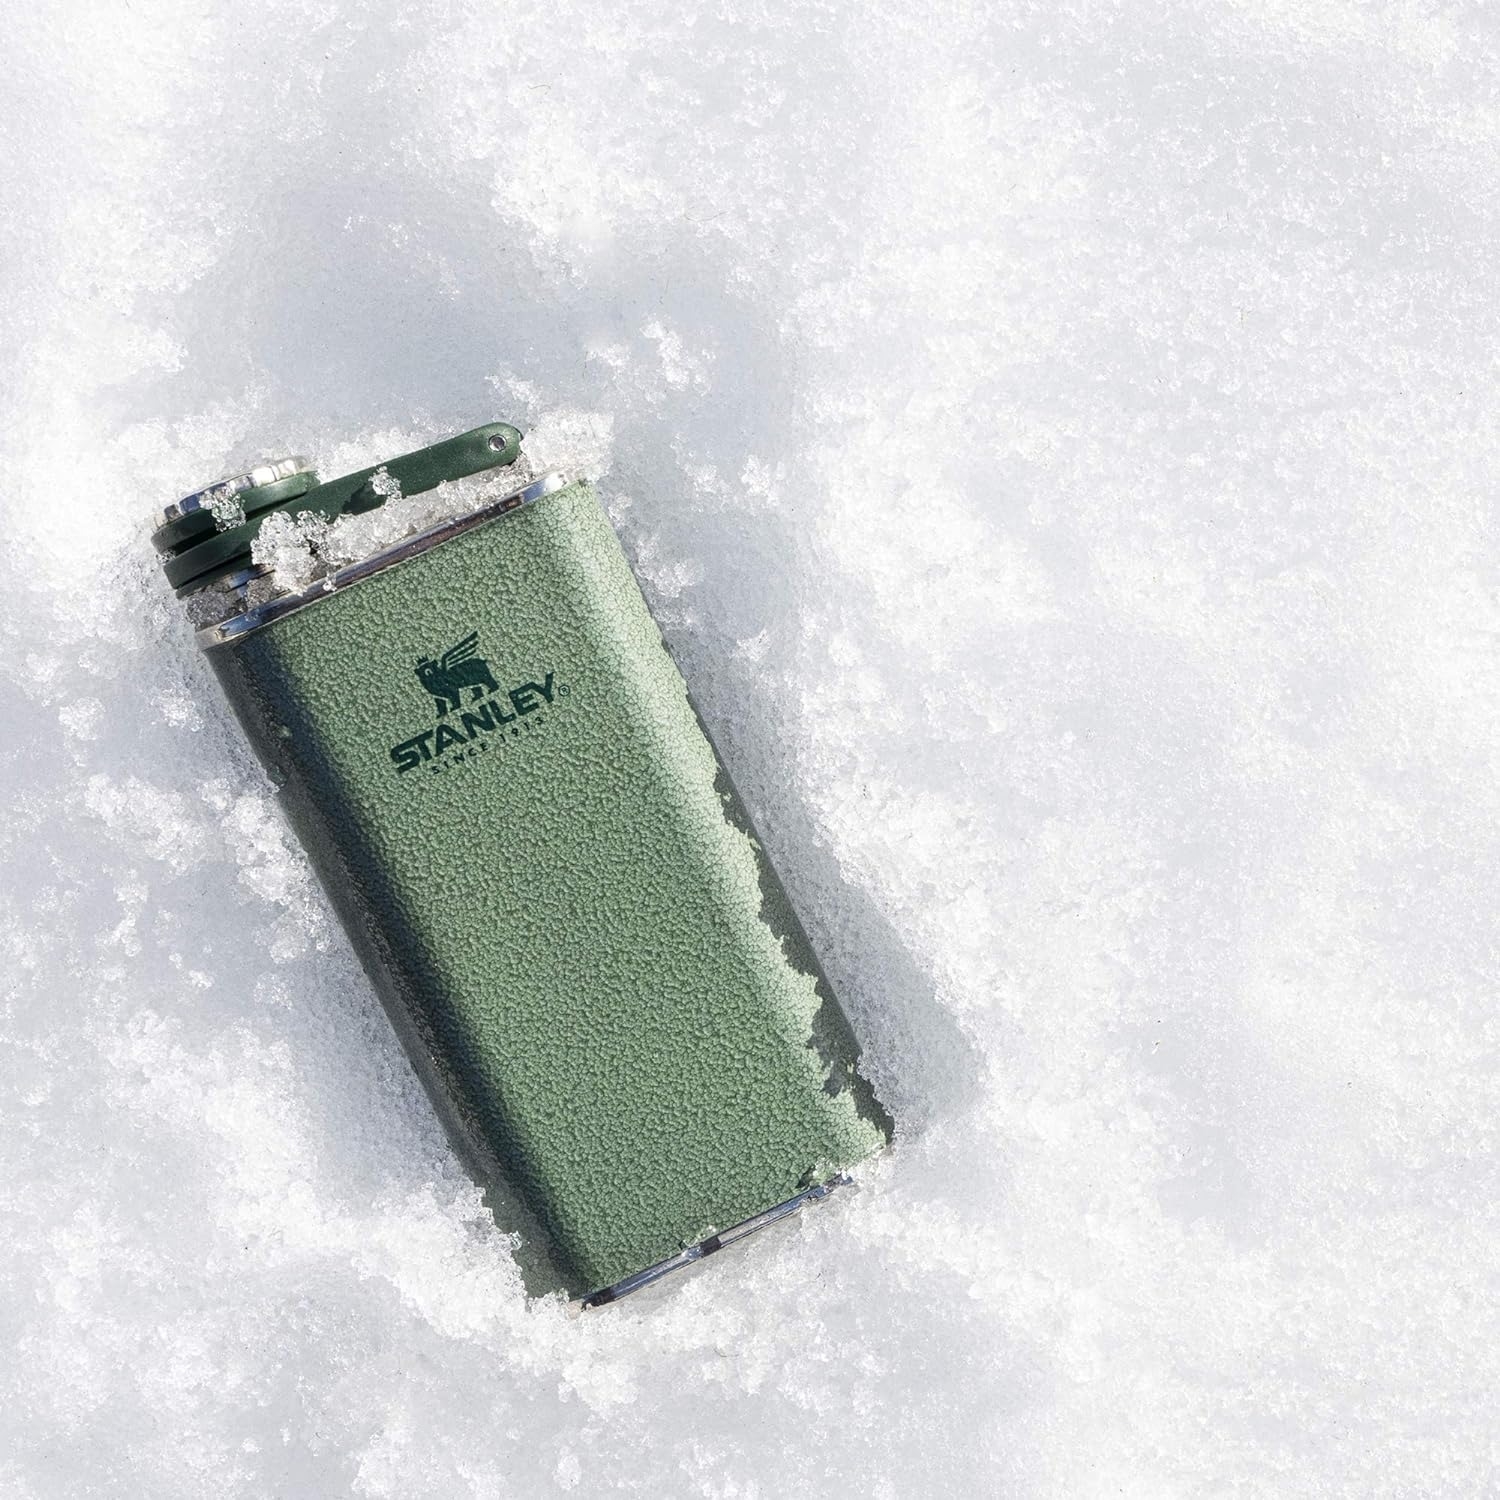 green Stanley flask in pile of snow